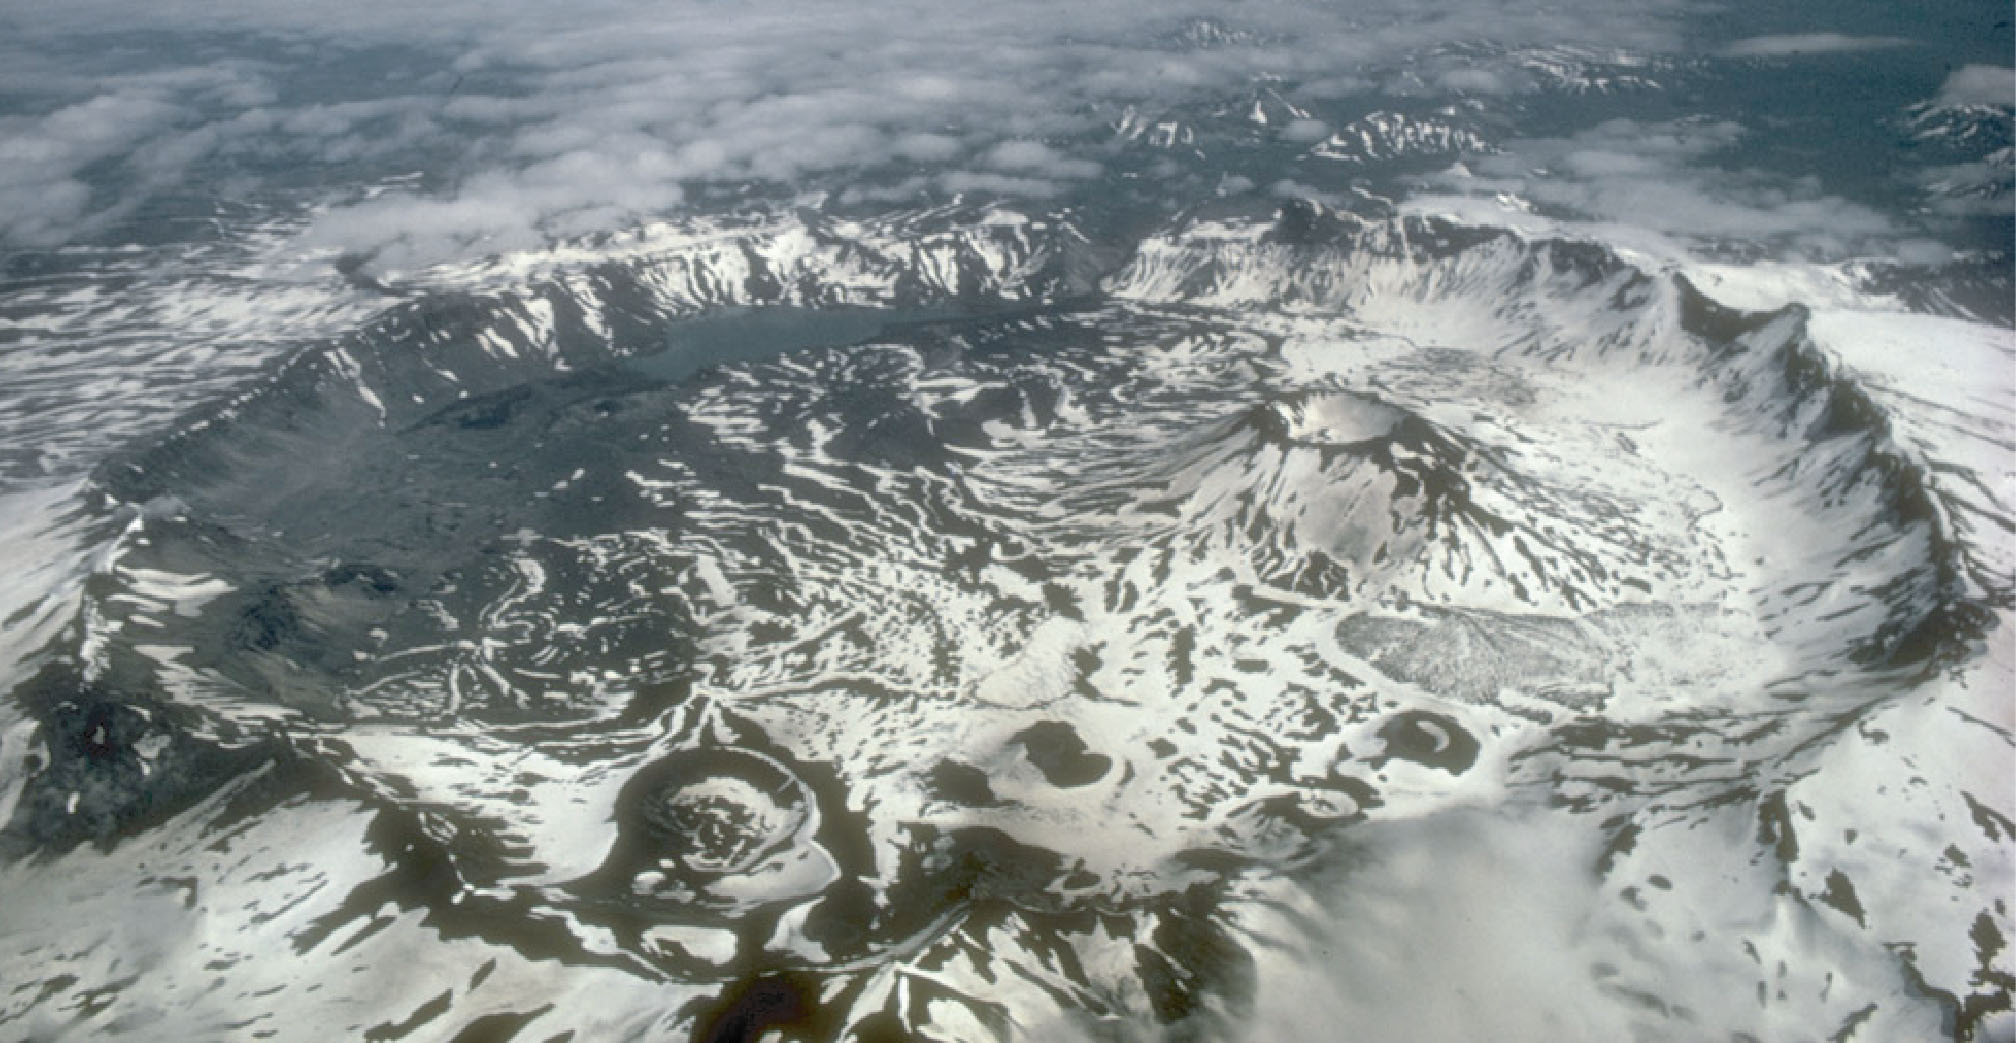 Aerial photo of Aniakchak caldera in Alaska. The photo shows a circular depression in the landscape surrounded by a raised rim. Inside is a projecting volcanic cone. The landscape is brown and dusted with white snow.